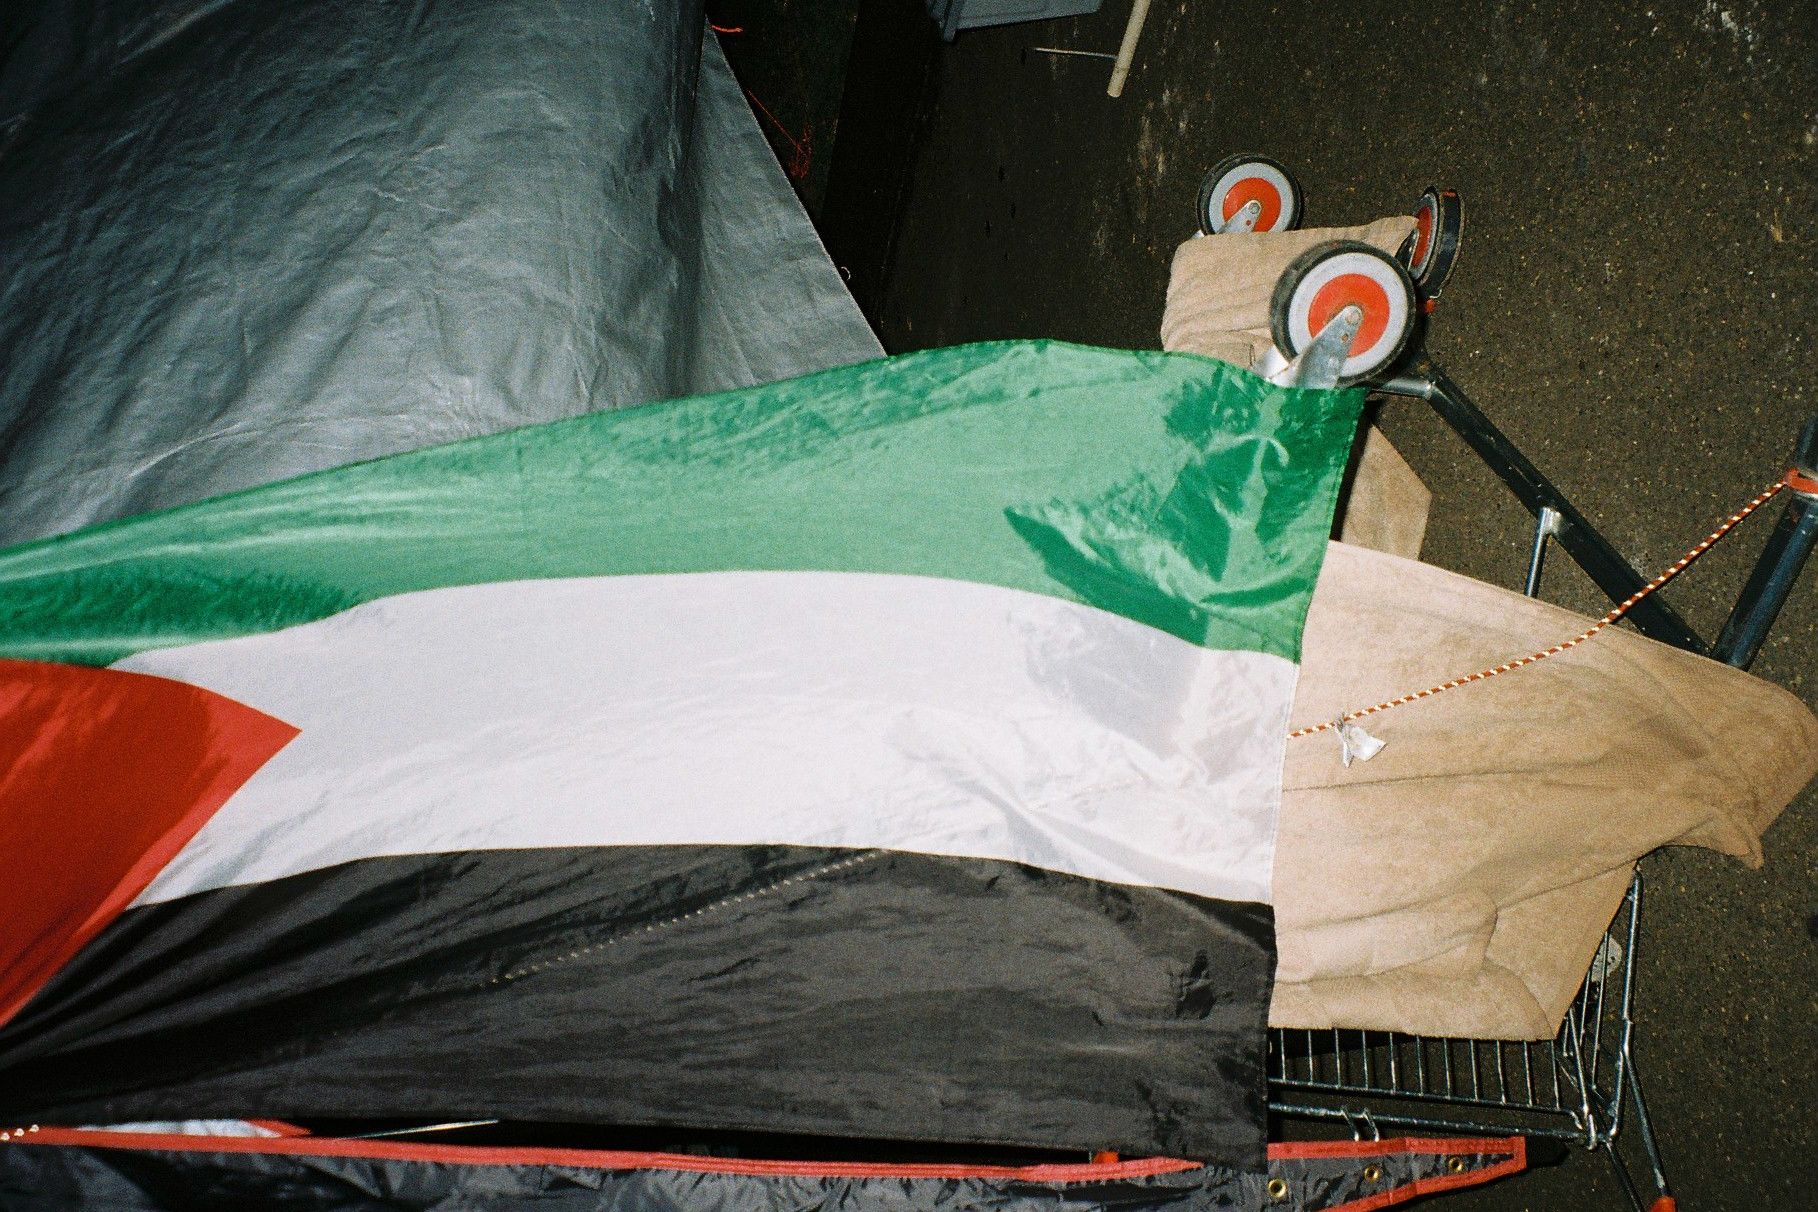 A Palestinian flag drapped over a tipped over trolley